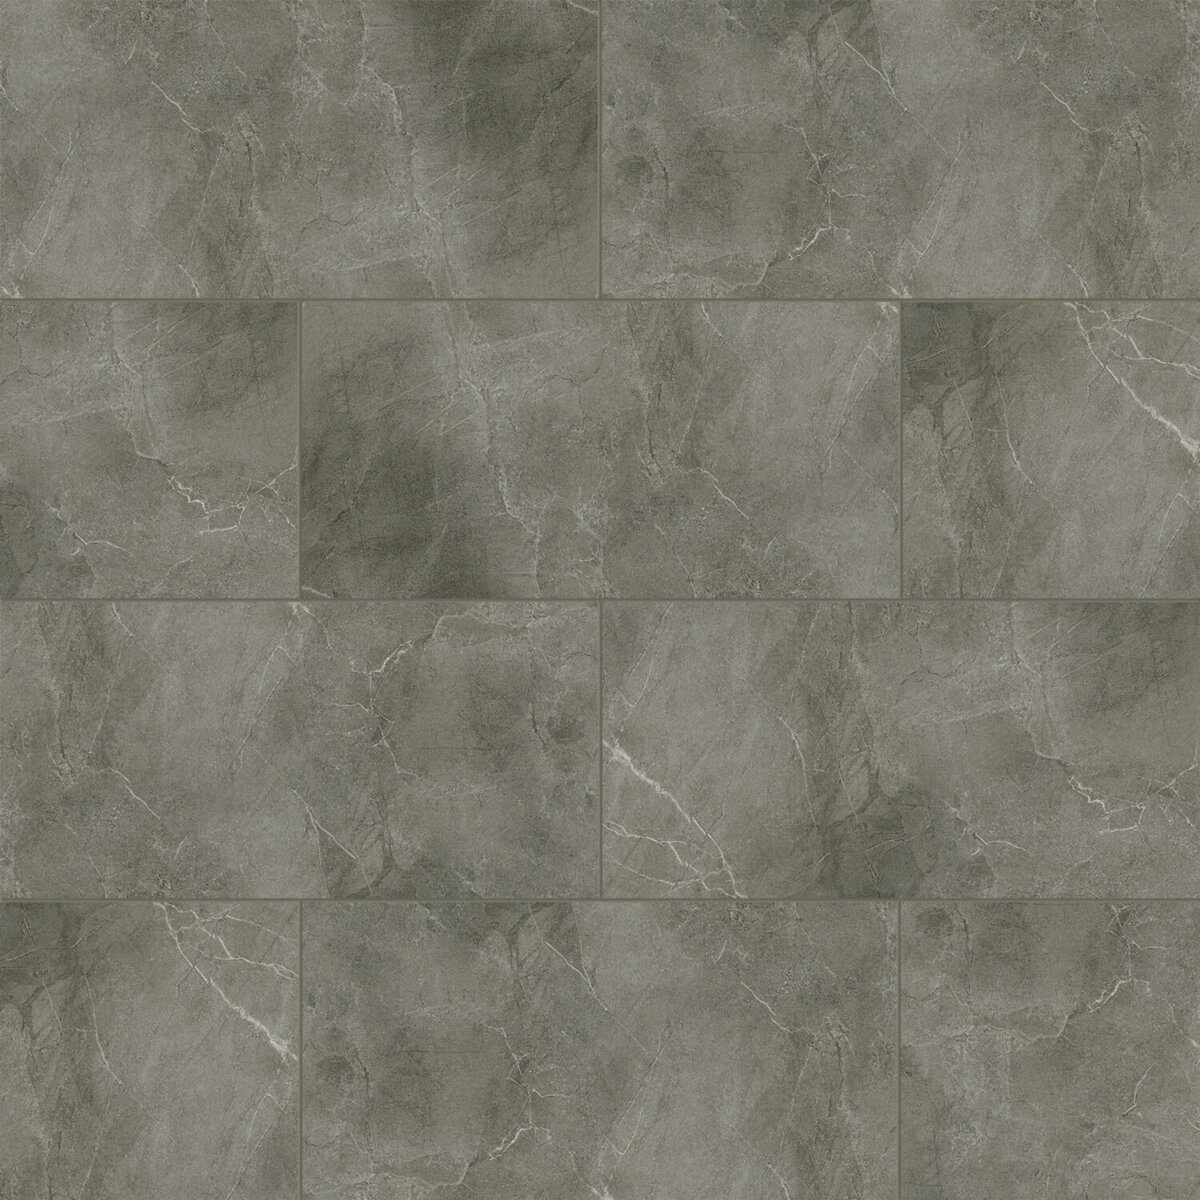 Essence Scarborough Rock Grey SR Rectified 600x1200mm_Stiles_Product_Image